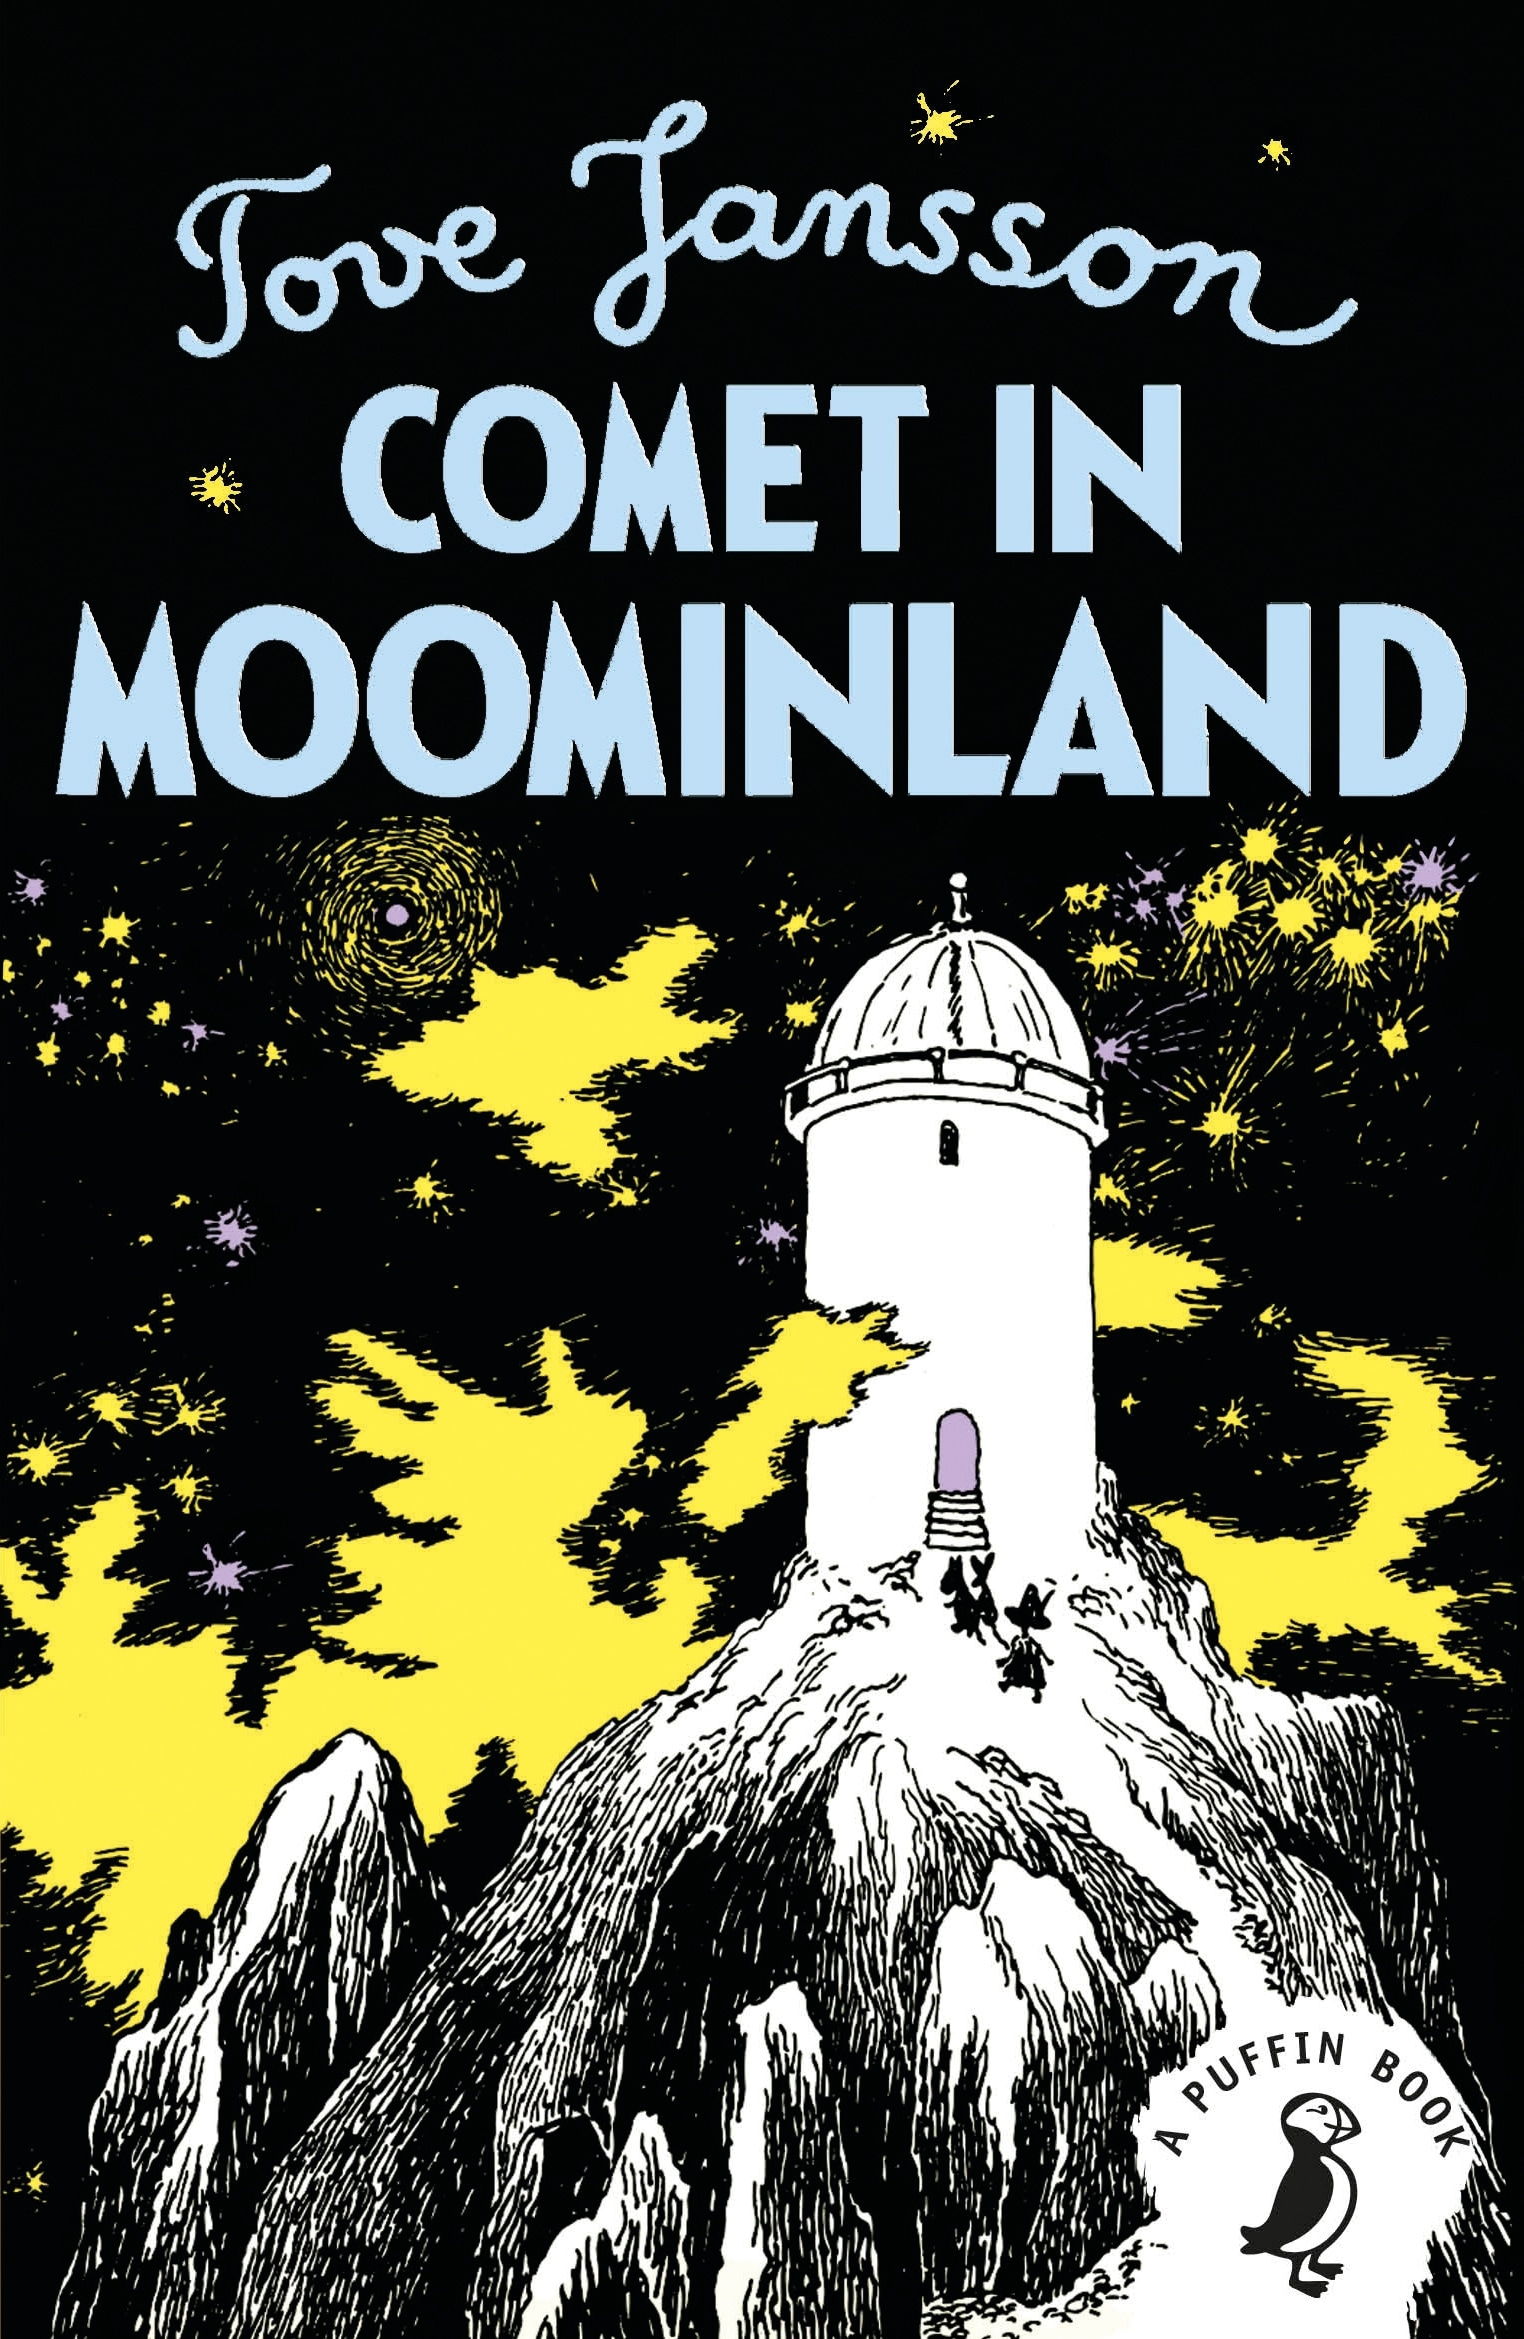 Book “Comet in Moominland” by Tove Jansson, Hugh Dennis — February 7, 2019